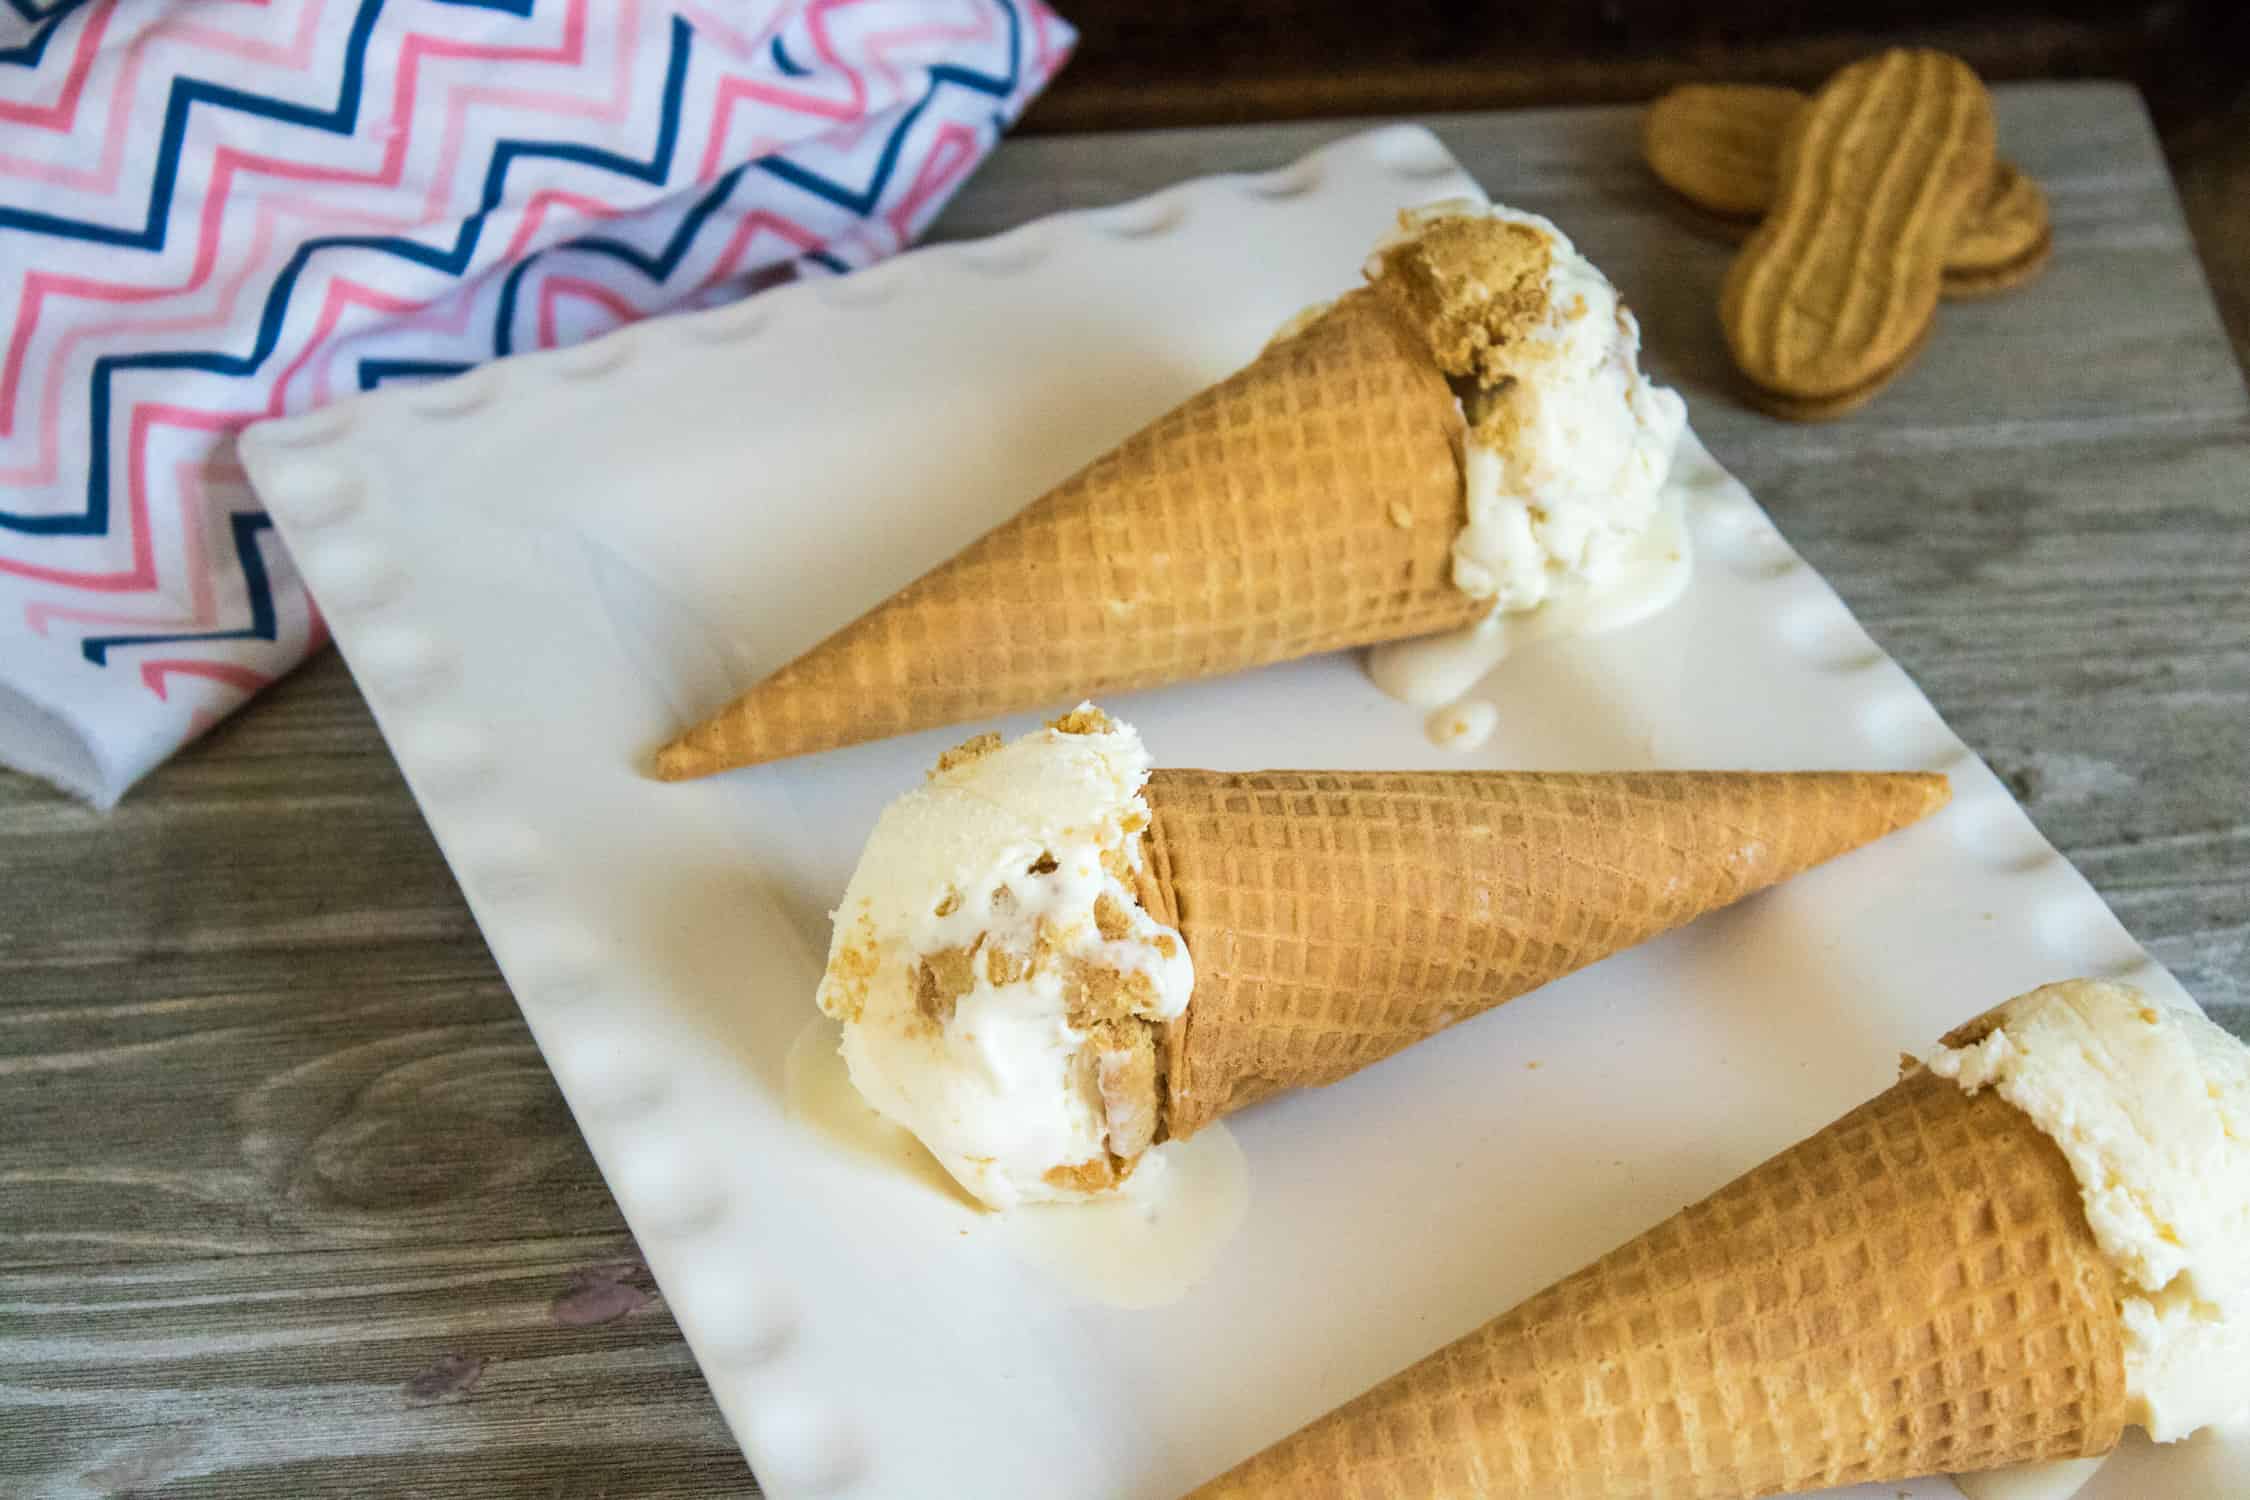 Nutter Butter No-Churn Ice Cream scooped into sugar cones and served on a white platter